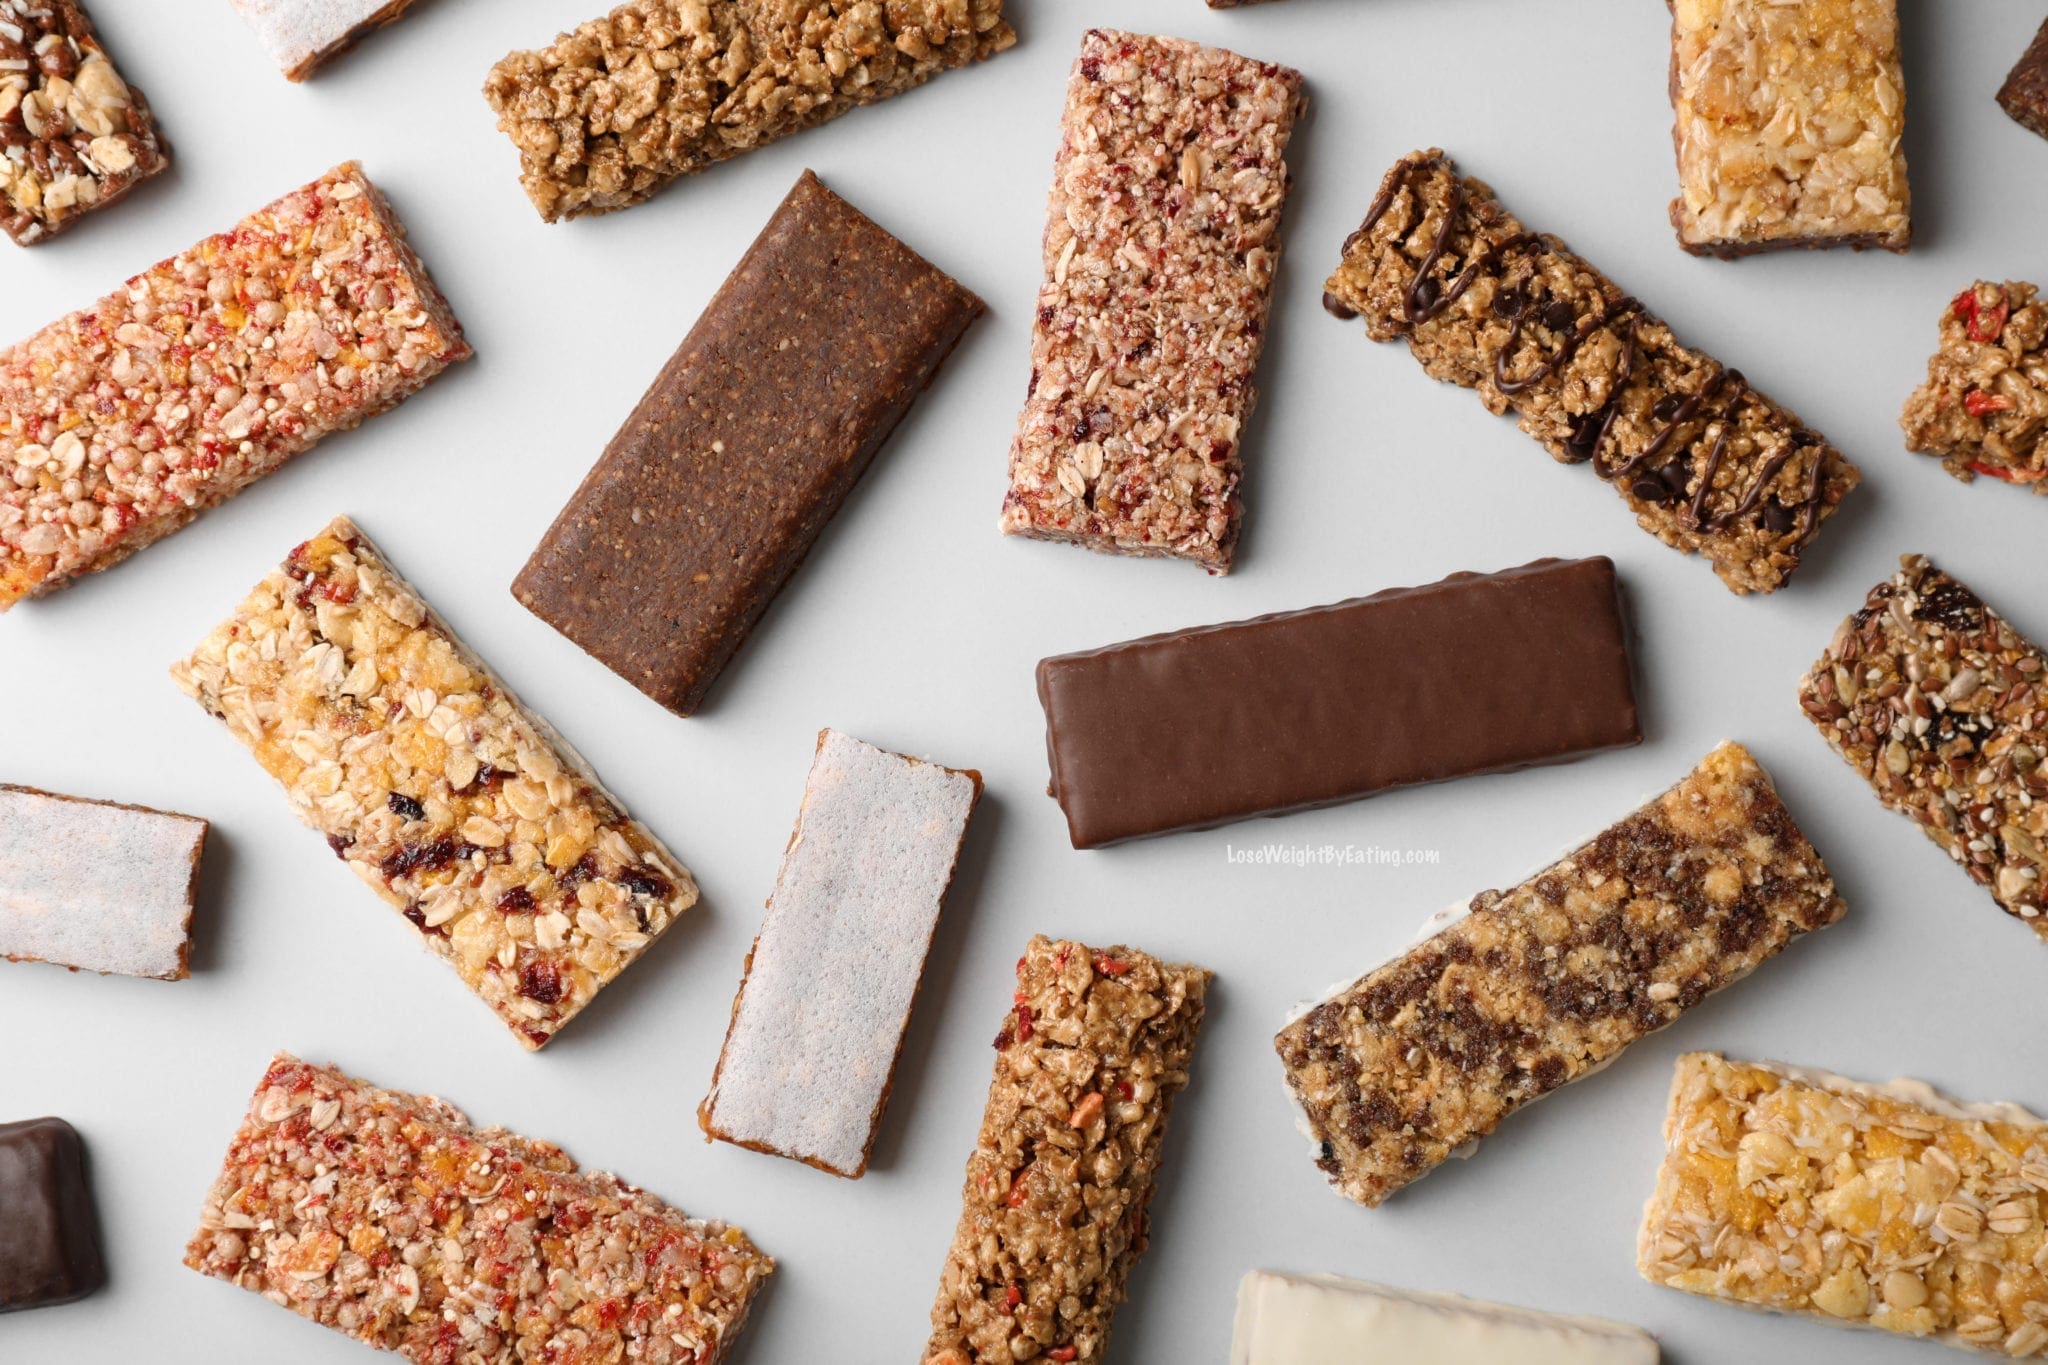 The 10 Best Protein Bars for Weight Loss - Lose Weight By Eating